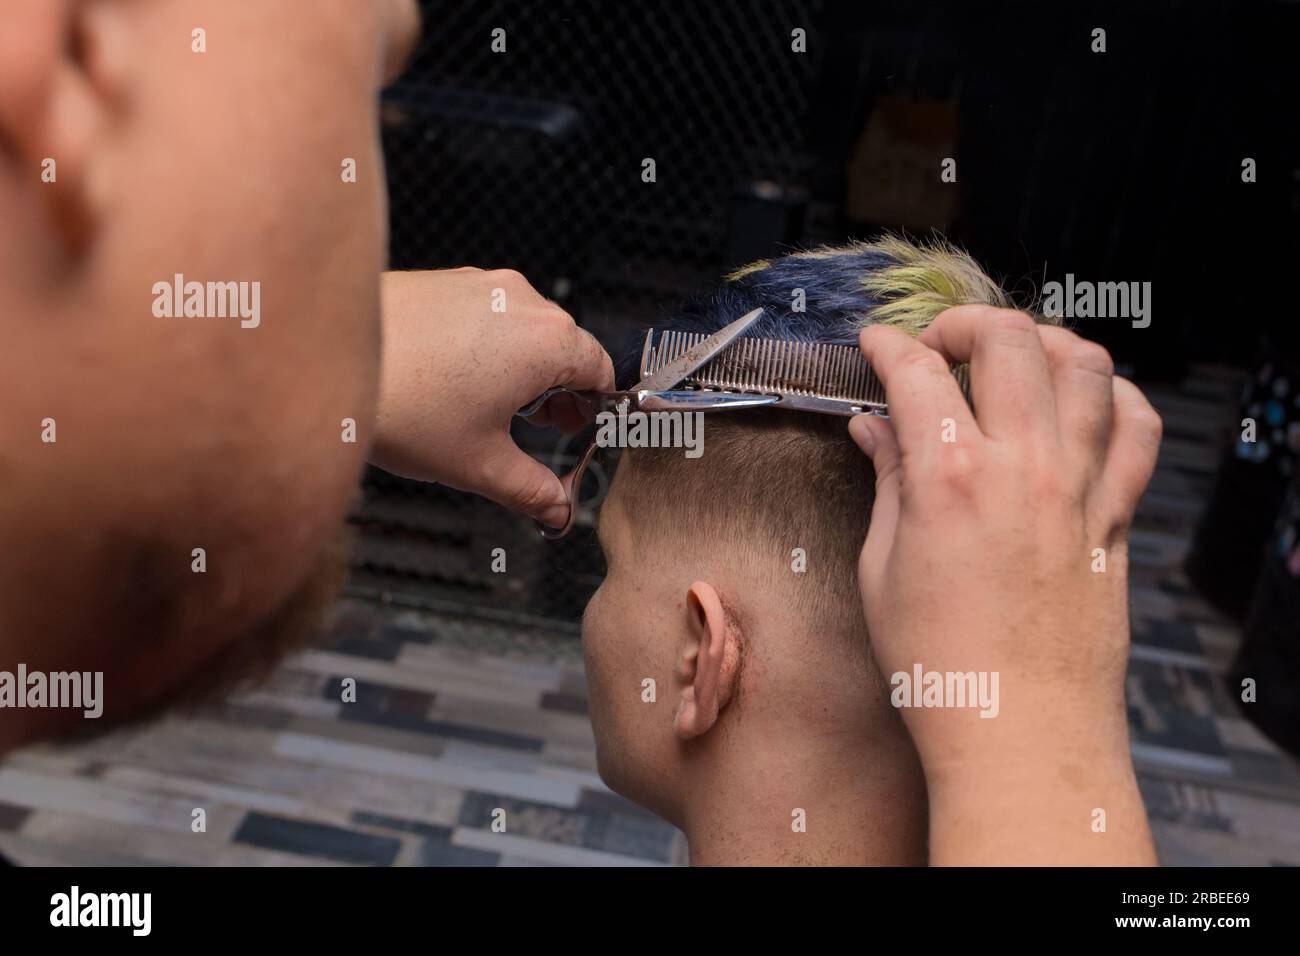 Hairdresser barber salon man cuts hair to a client guy at work with scissors and a comb professionally. Stock Photo